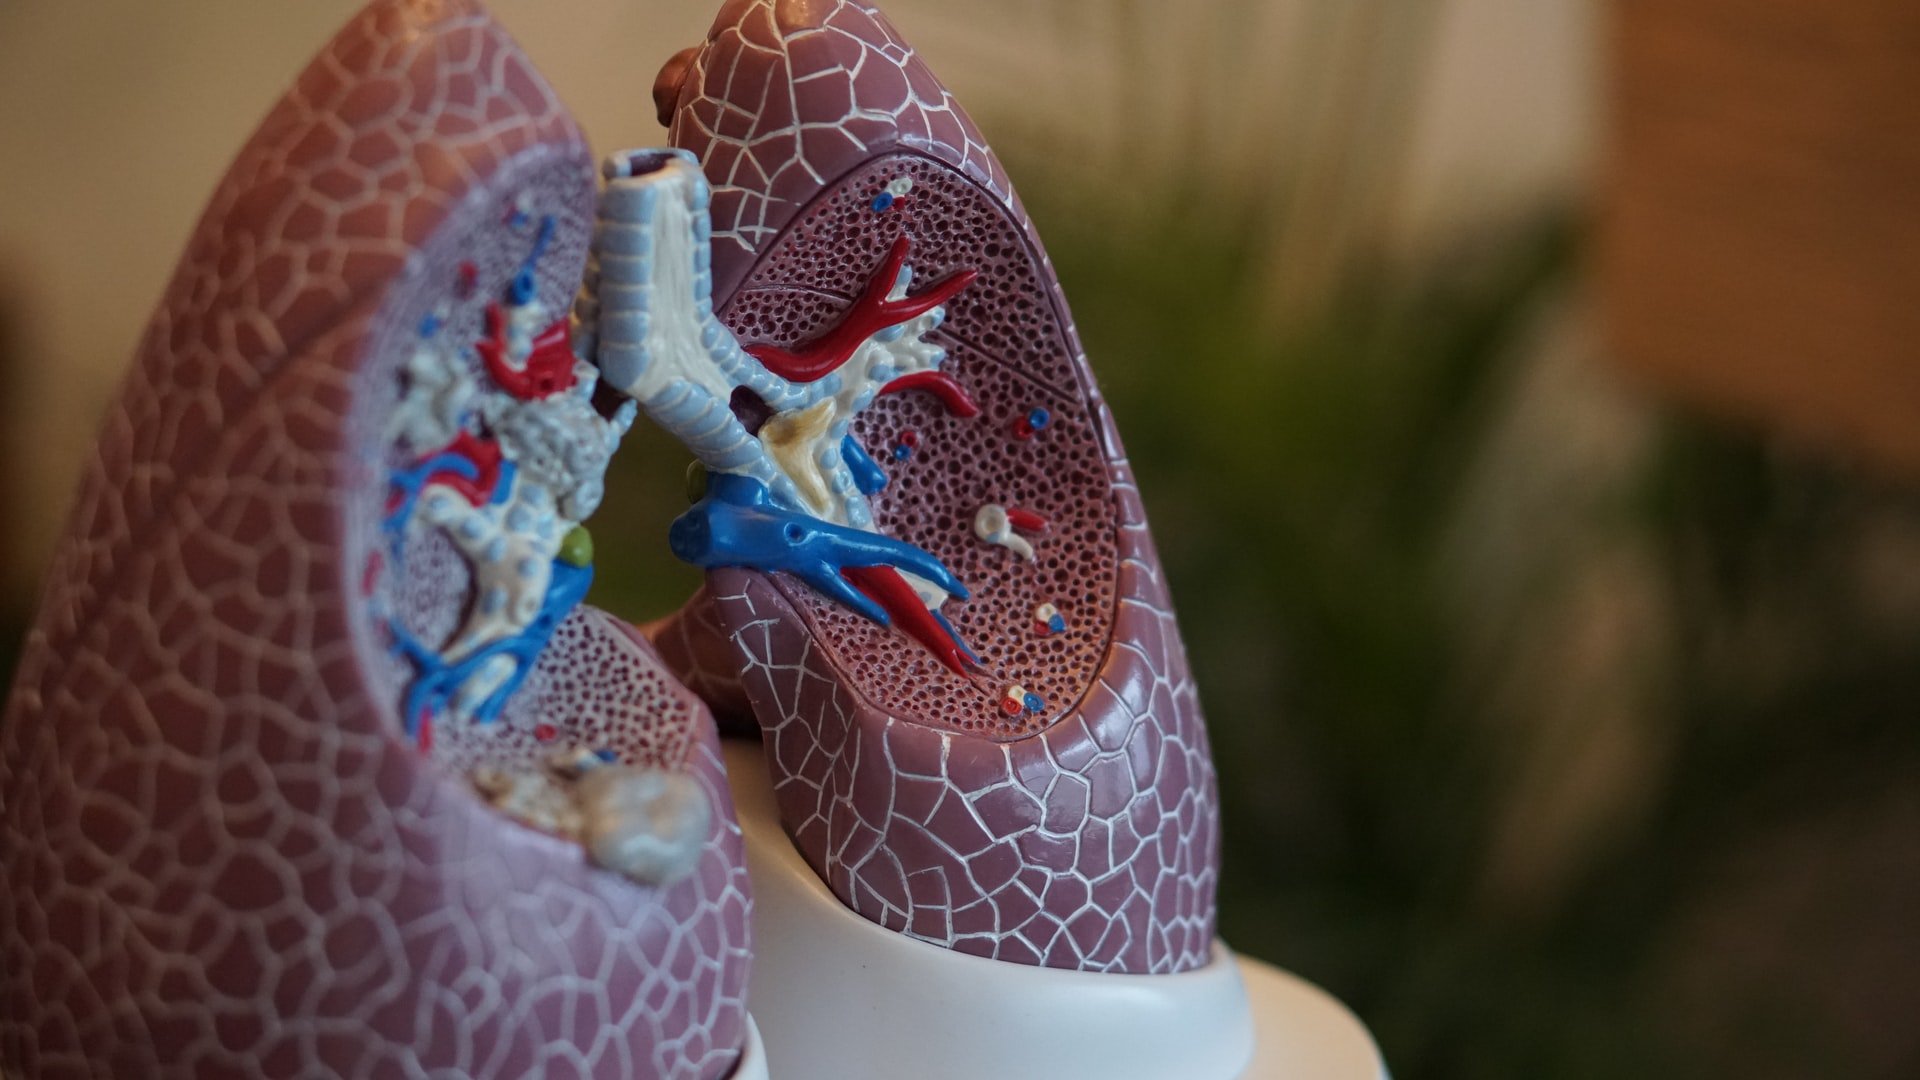 Vicore's bet pays off as pulmonary fibrosis drug improves lung function in phase 2